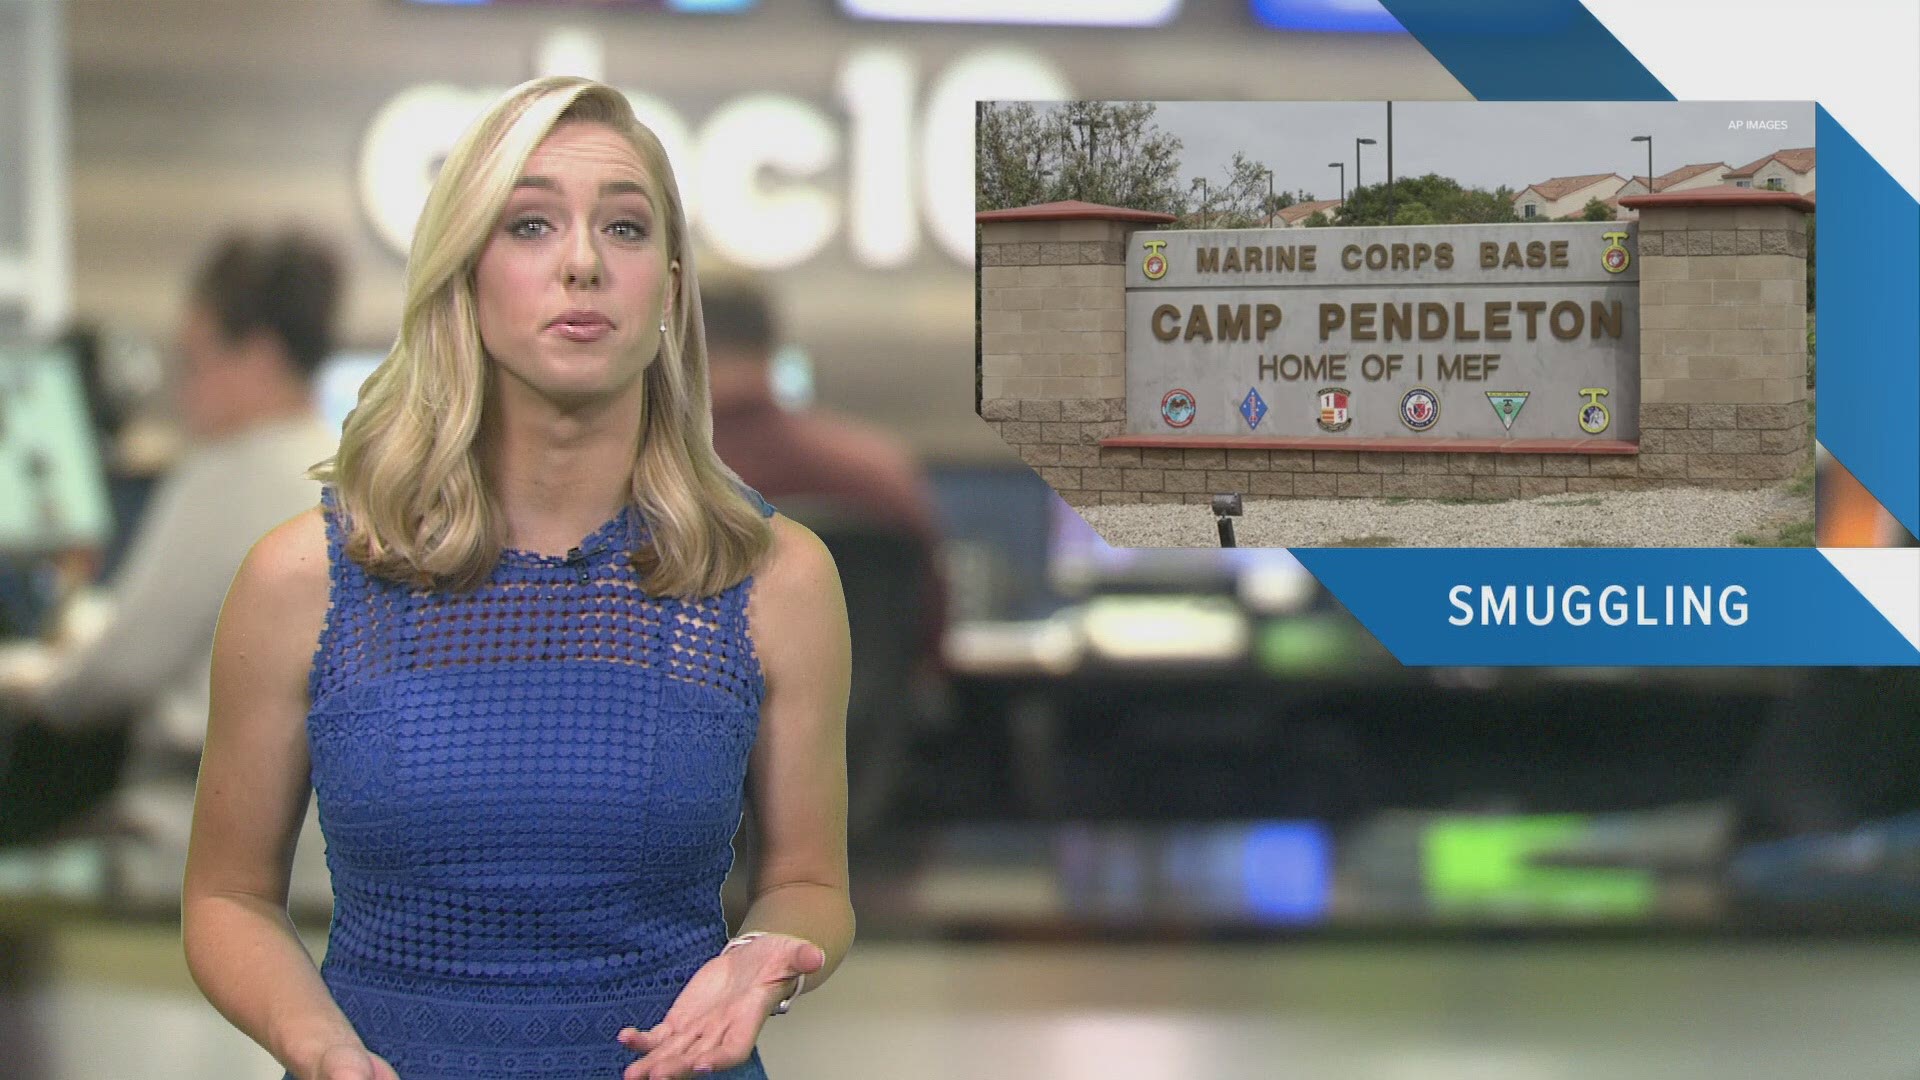 Evening Headlines: July 25, 2019 | Catch in-depth reporting on #LateNewsTonight at 11 p.m. | The latest Sacramento news is always at www.abc10.com